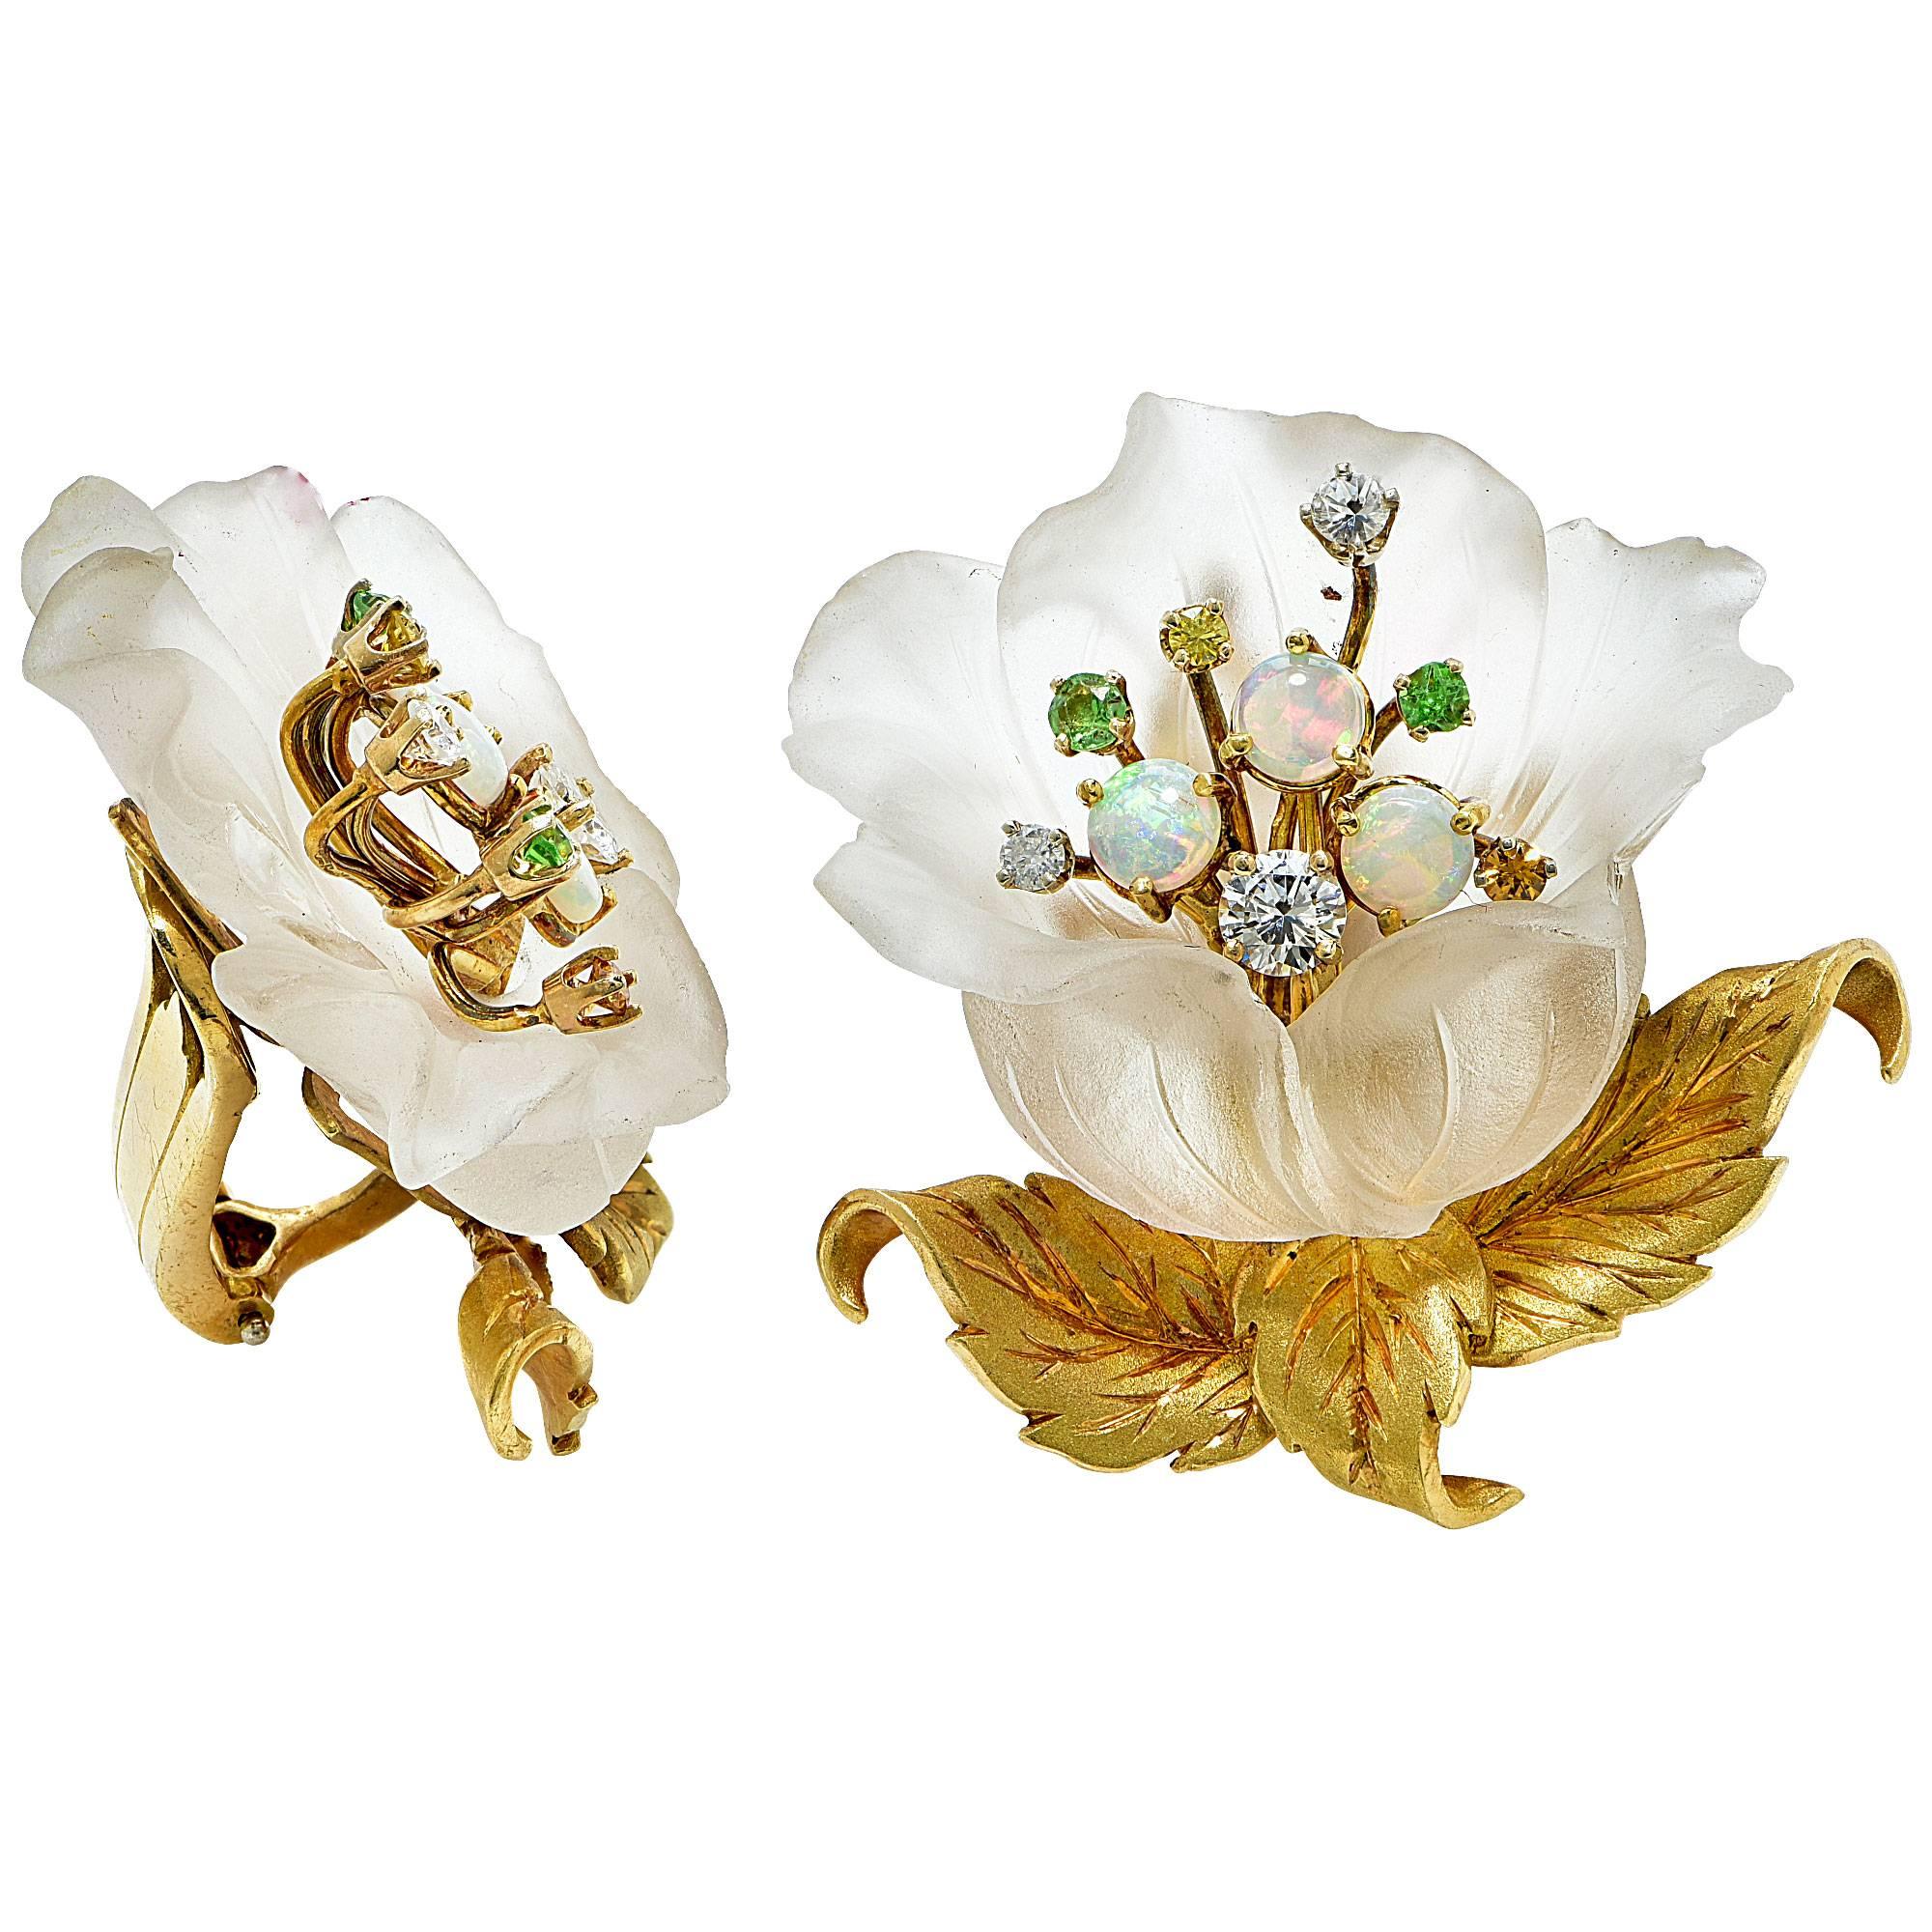 18k yellow gold earrings made of carved rock crystal petals accented by 10 round brilliant cut and sigle cut diamonds weighing approximately .70cts as well as 4 demantoid garnets and 9 cabochon opals.

These earnings are a work of art and measure